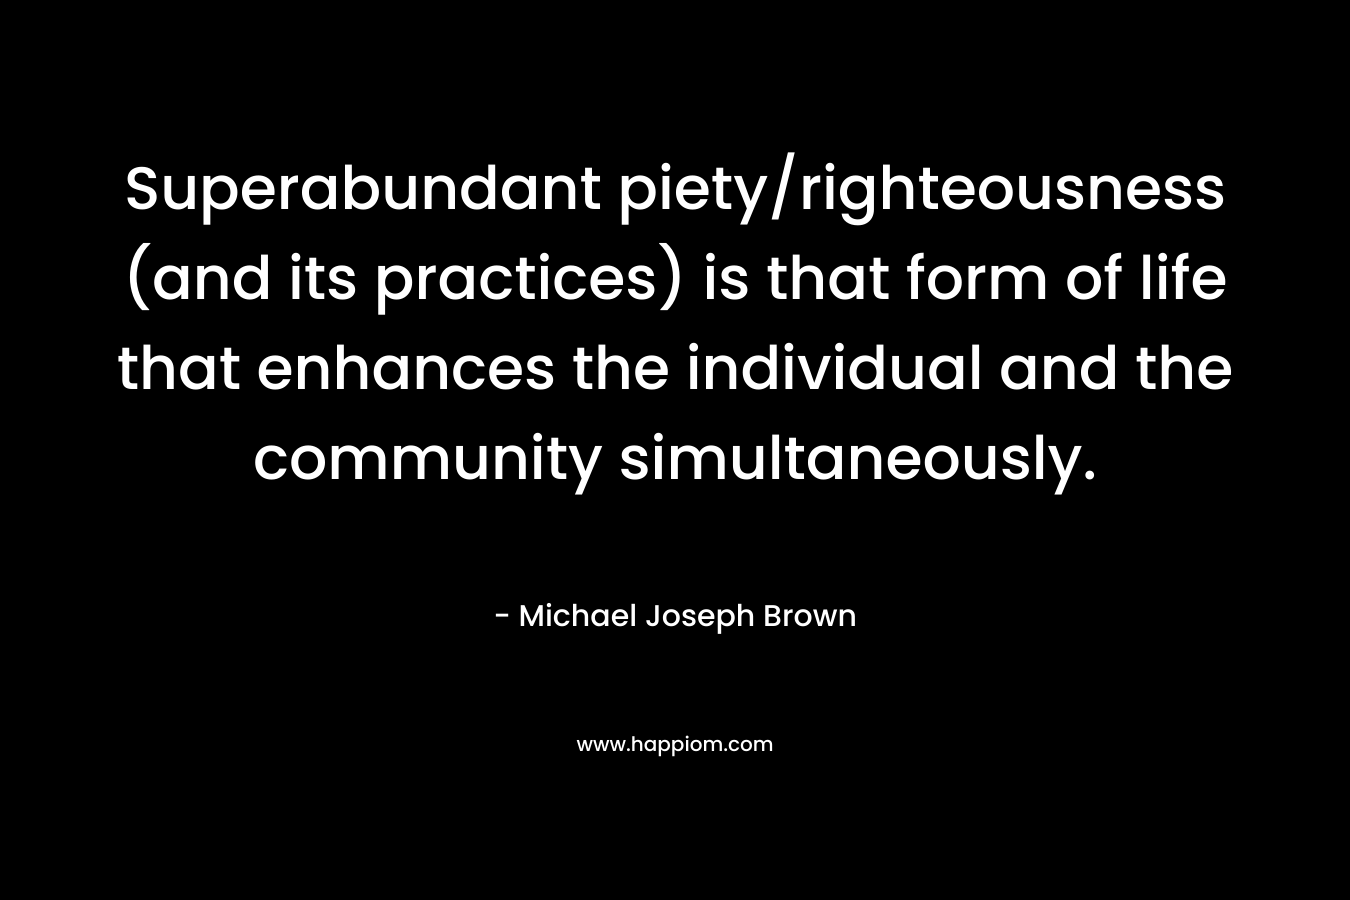 Superabundant piety/righteousness (and its practices) is that form of life that enhances the individual and the community simultaneously. – Michael Joseph Brown